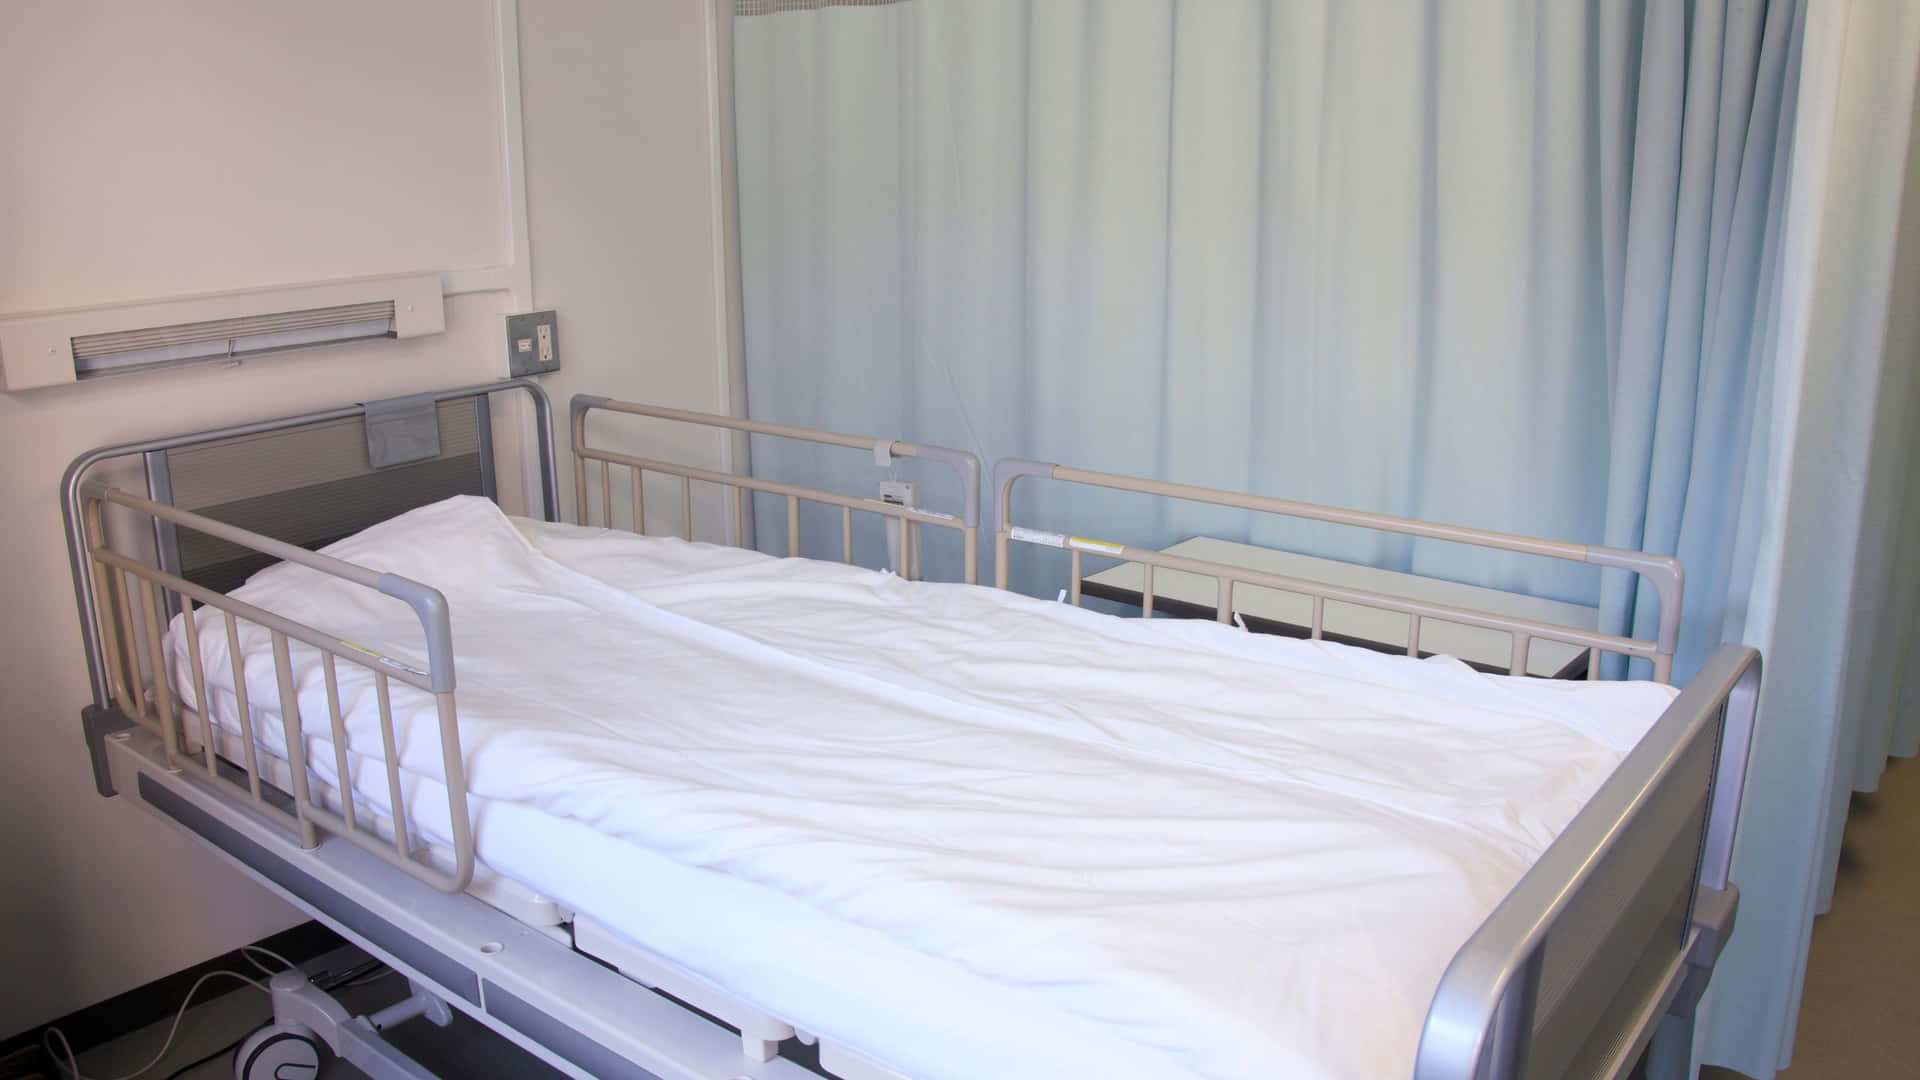 A Hospital Bed In A Room